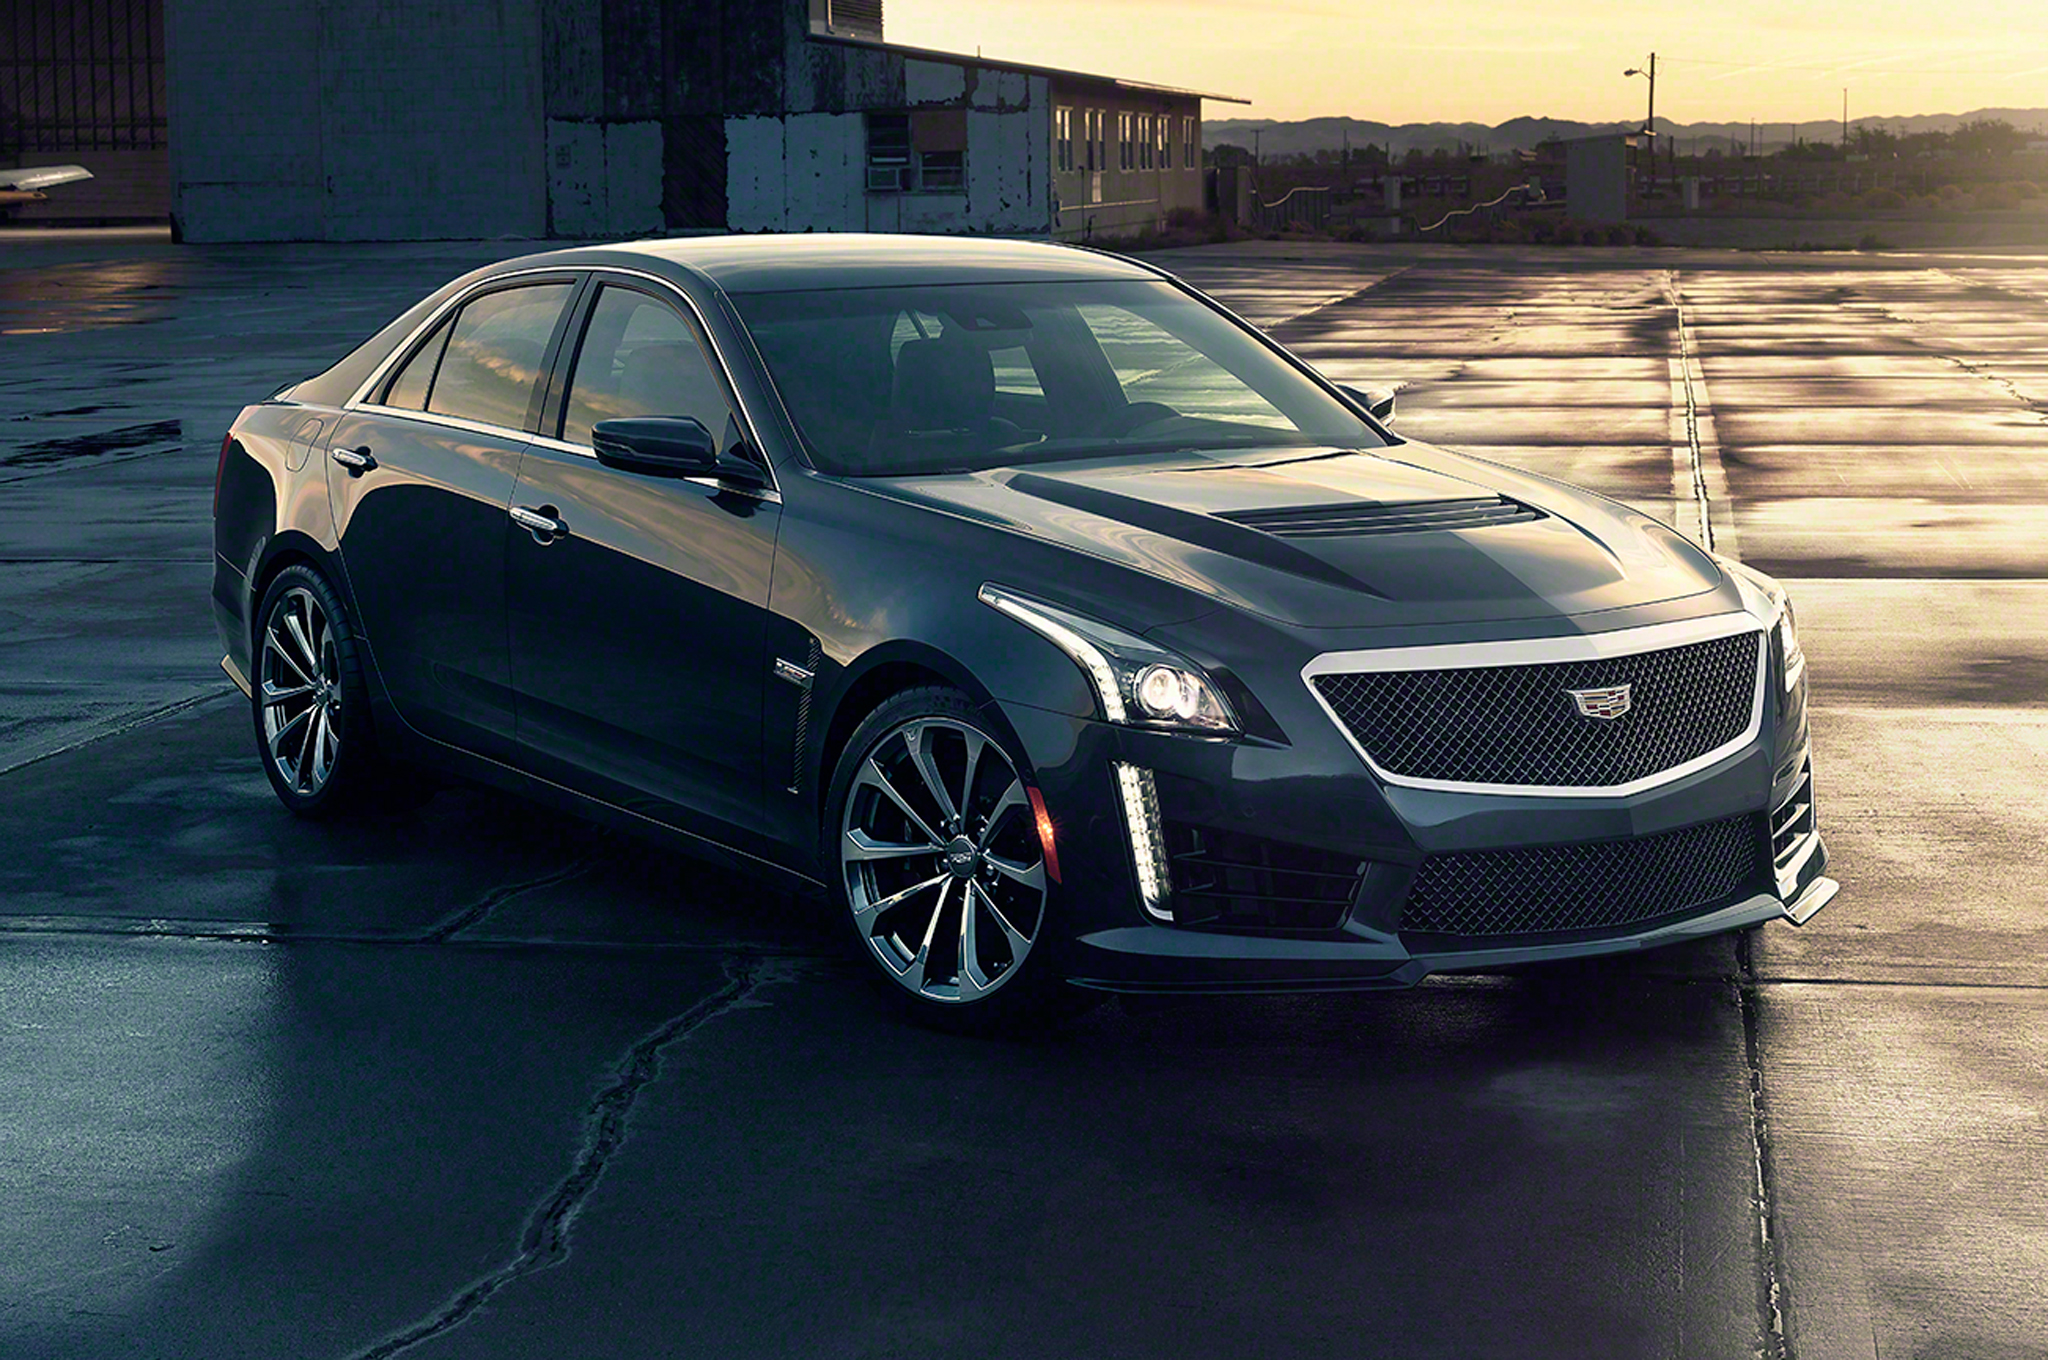 2017 Cadillac Cts V Sedan With Carbon Black Package Color Crystal White Tricoat Front Three Quarter Hd Wallpaper Peakpx